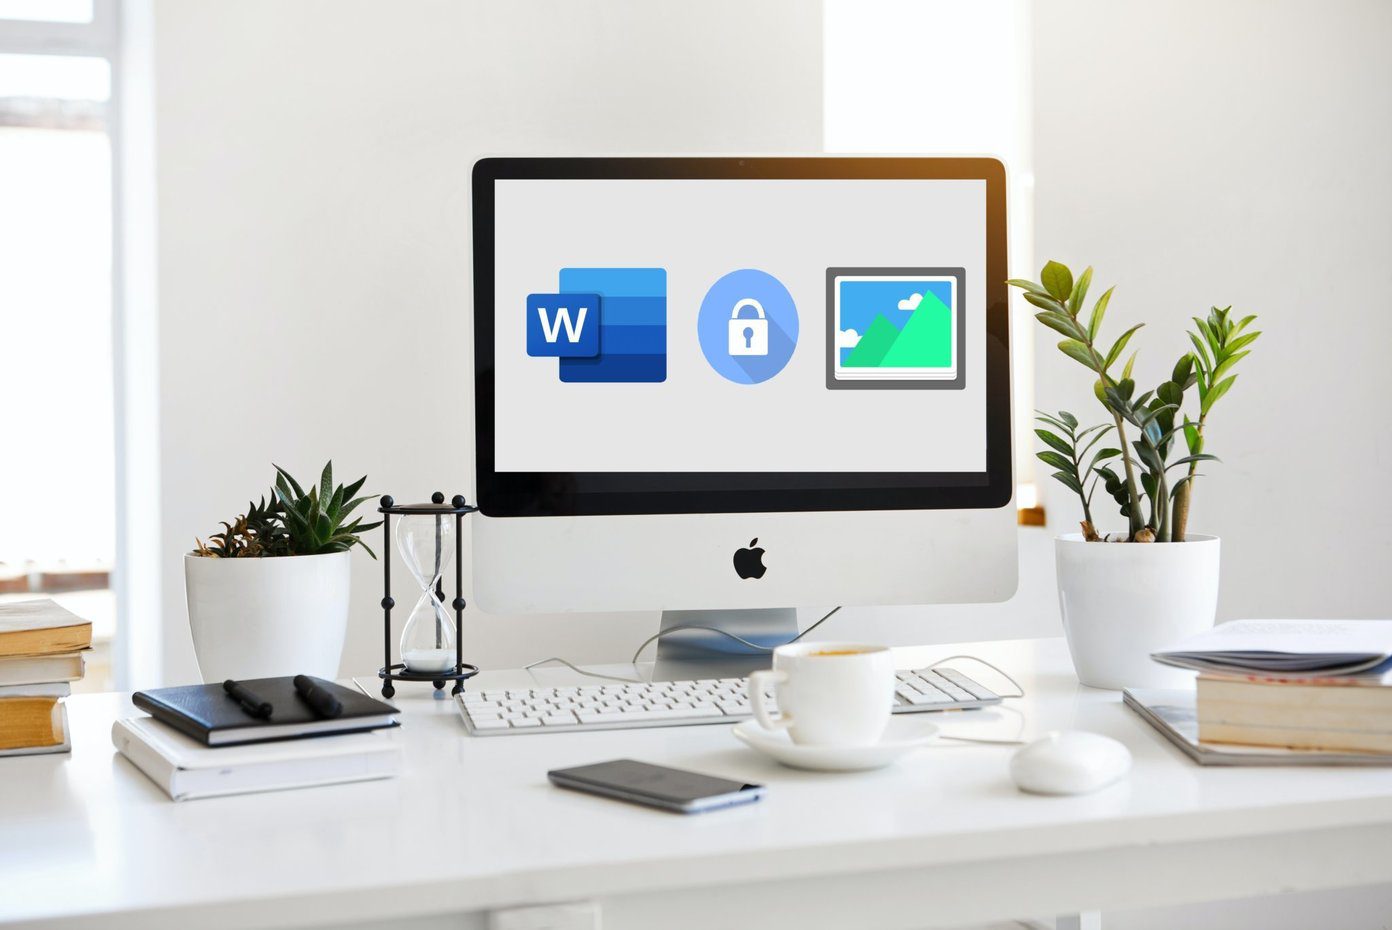 How to lock an image in microsoft word feature image1jpg